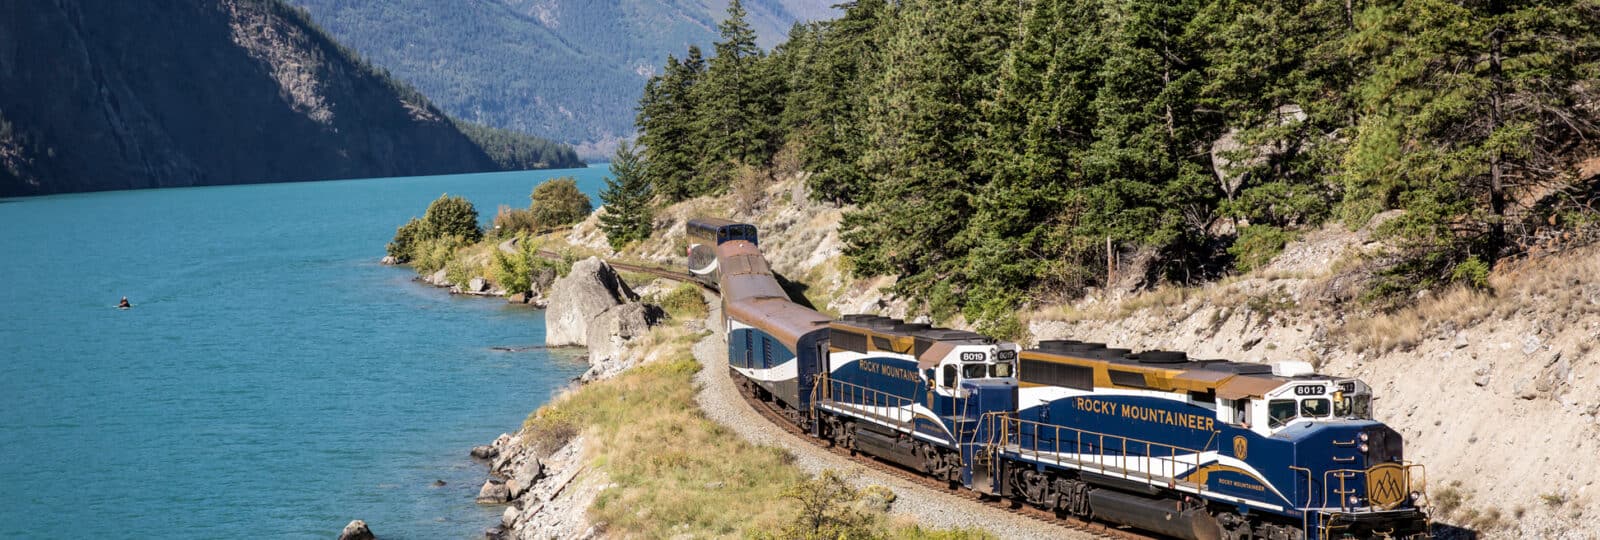 Rocky Mountaineer – Rainforest to Gold Rush